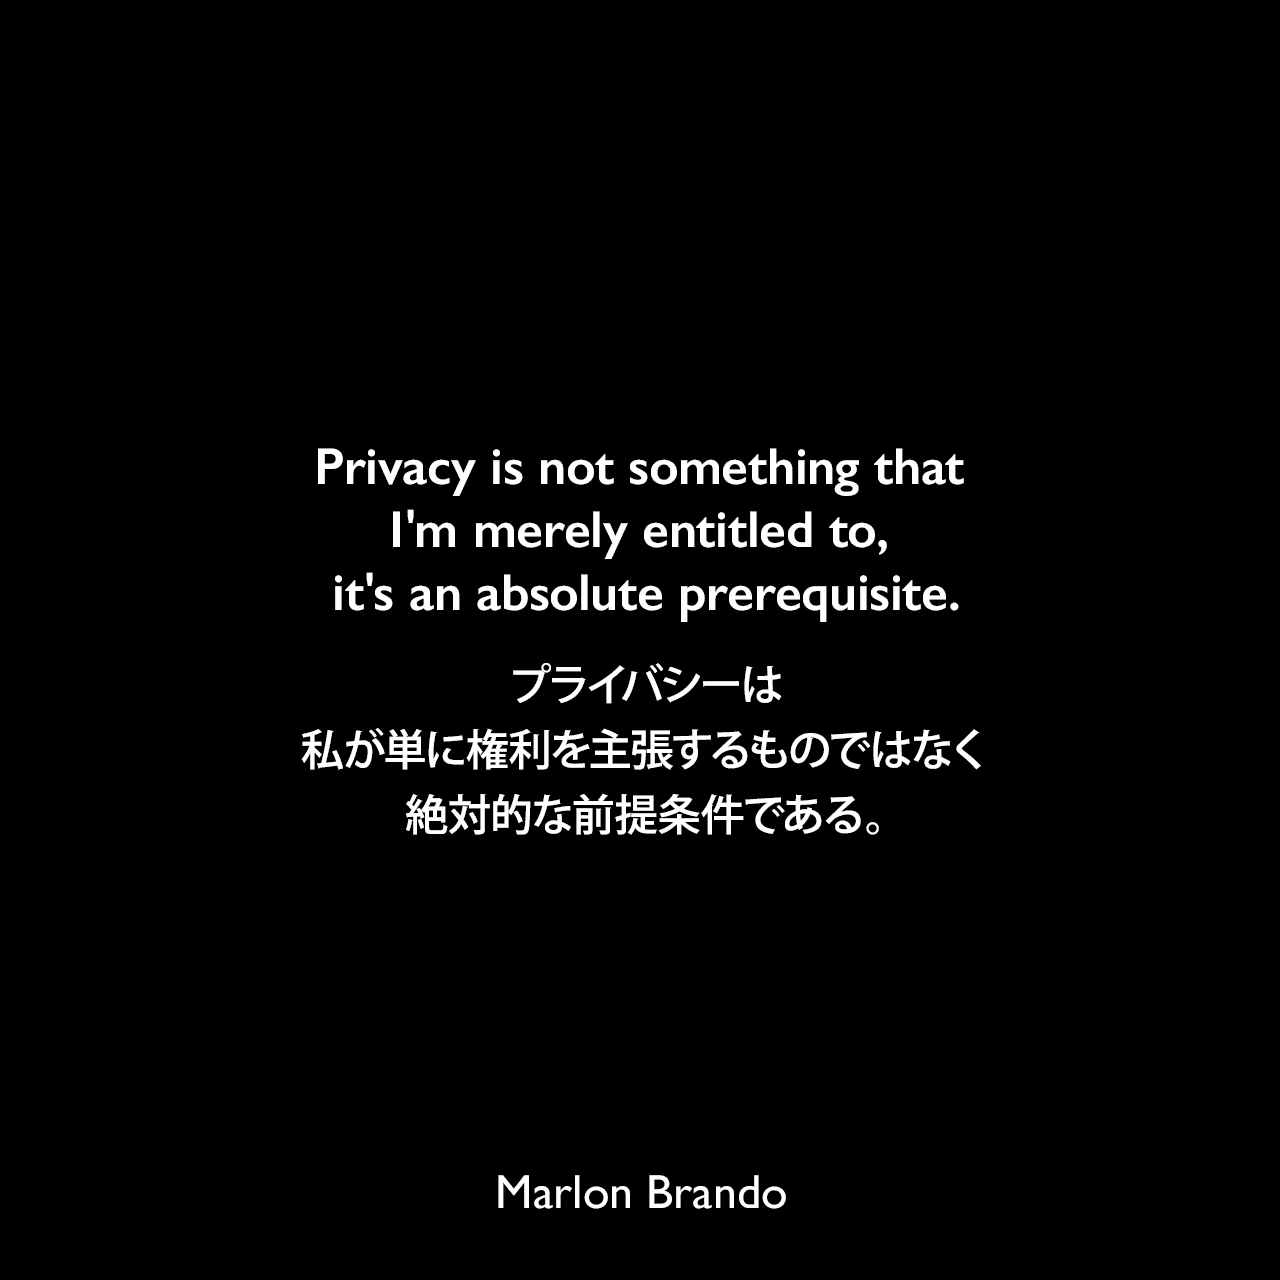 Privacy is not something that I'm merely entitled to, it's an absolute prerequisite.プライバシーは、私が単に権利を主張するものではなく、絶対的な前提条件である。Marlon Brando